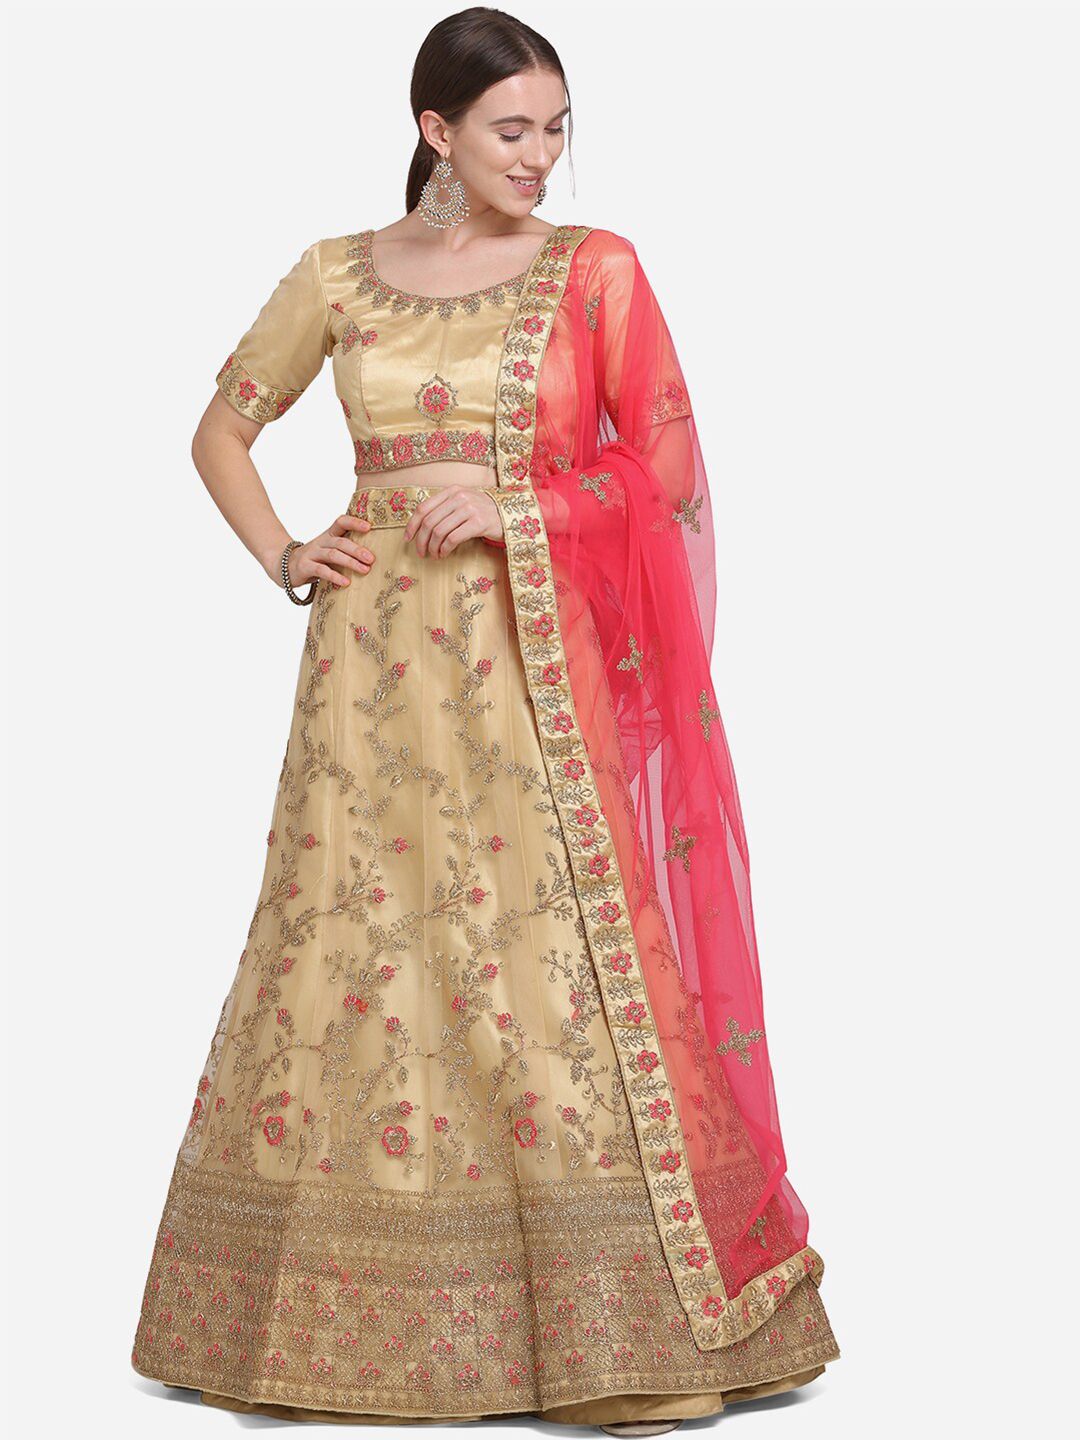 VRSALES Beige & Pink Embroidered Semi-Stitched Lehenga & Unstitched Blouse with Dupatta Price in India